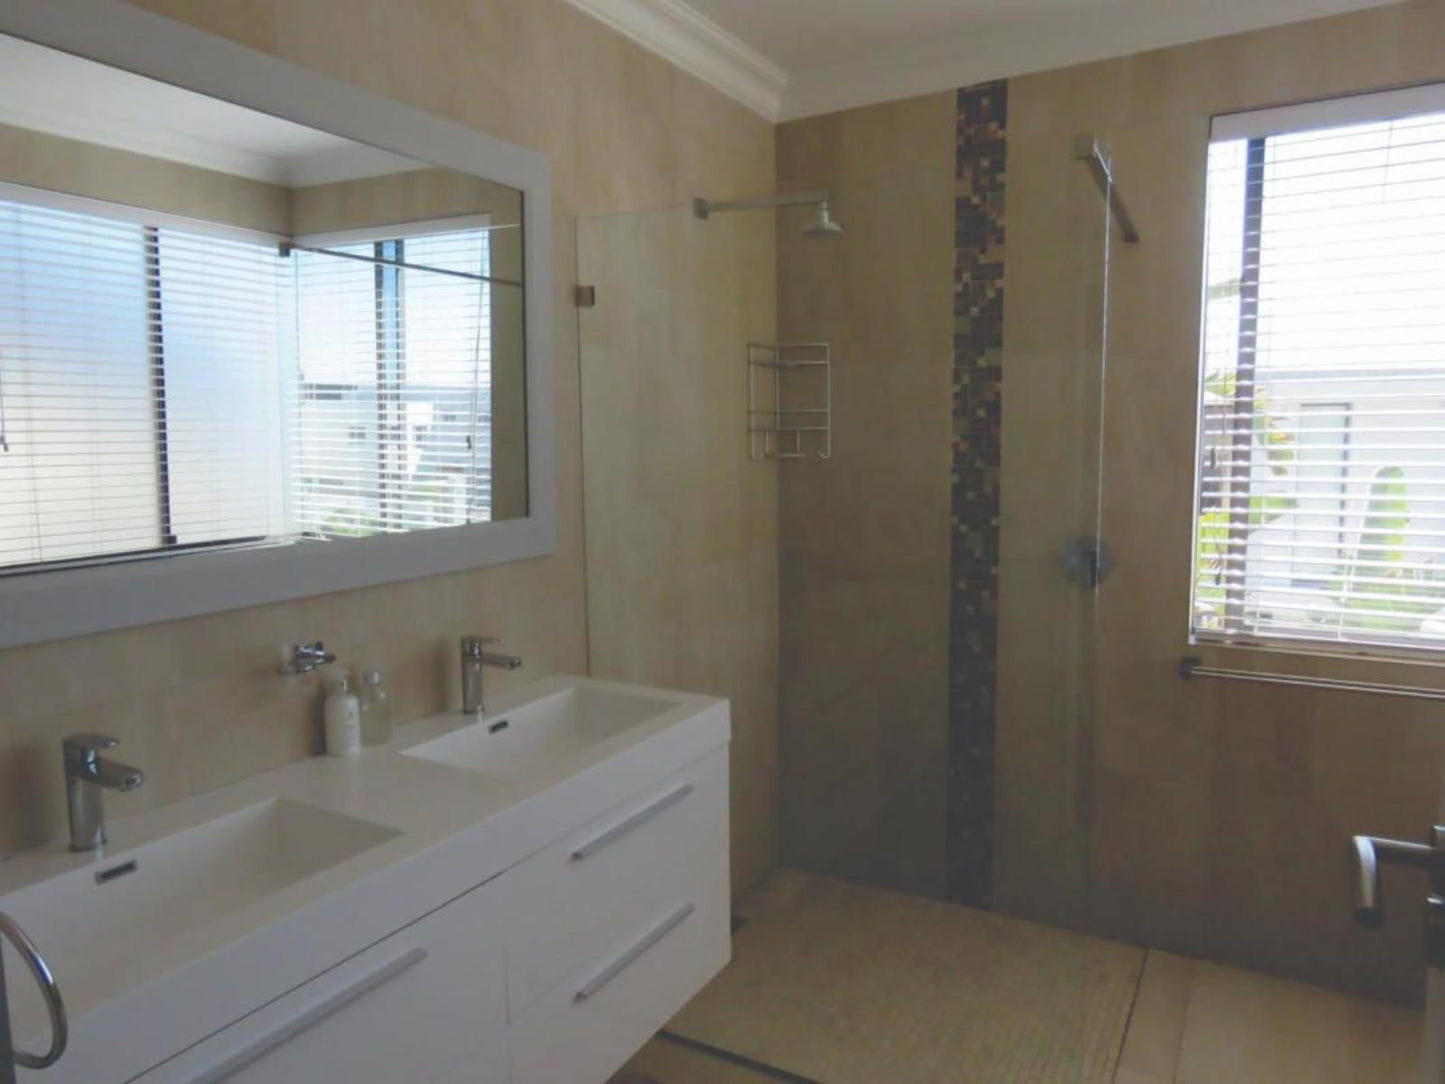 9 On Winkle Sunset Beach Cape Town Western Cape South Africa Unsaturated, Bathroom